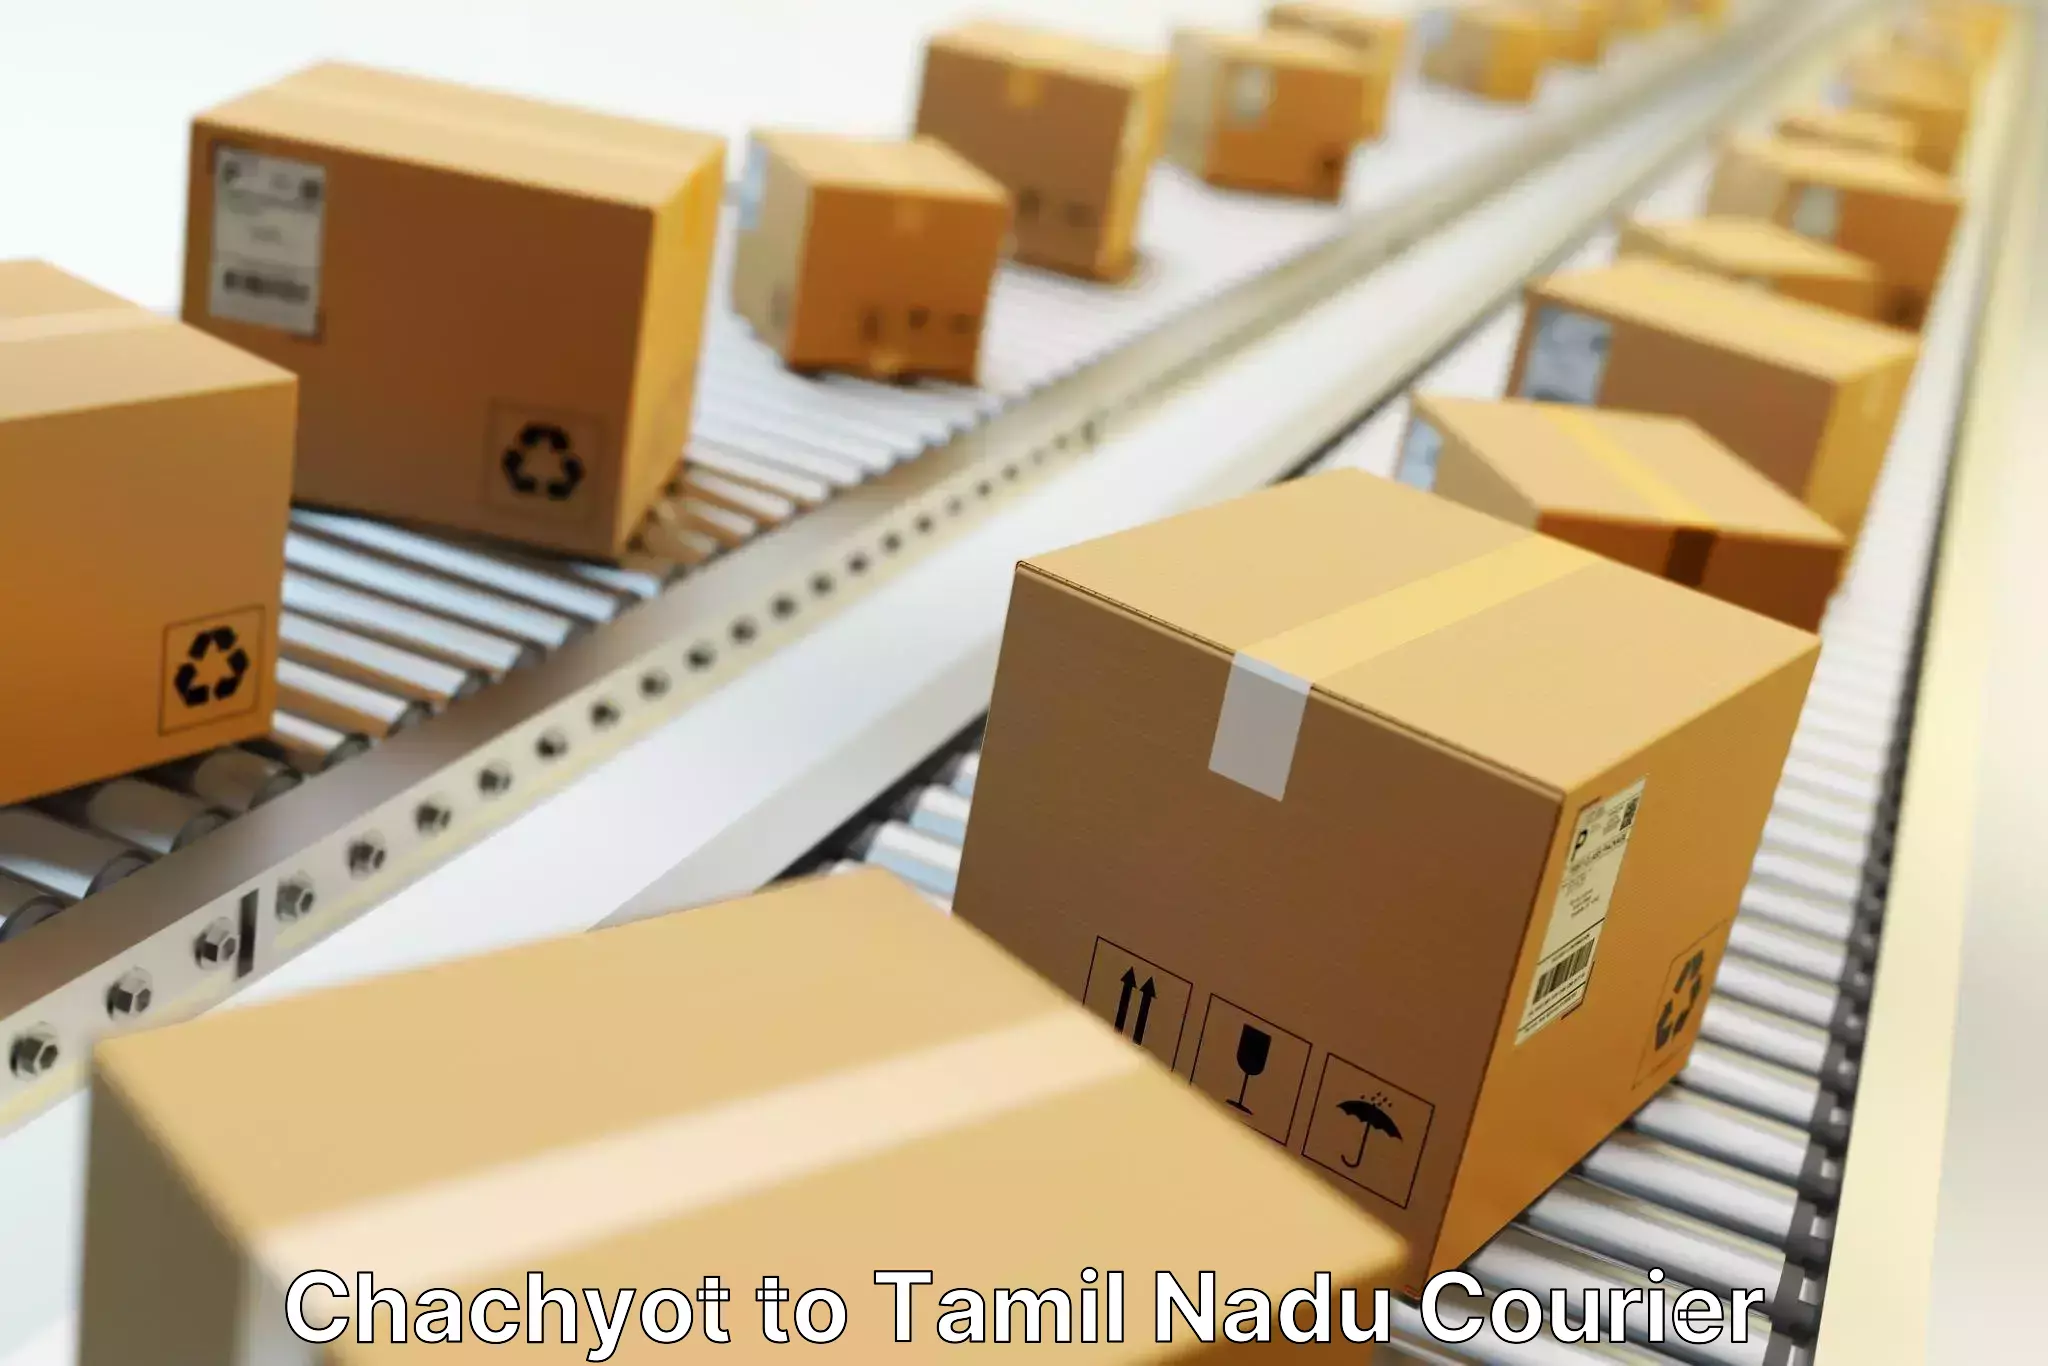 Courier service booking Chachyot to Vellore Institute of Technology